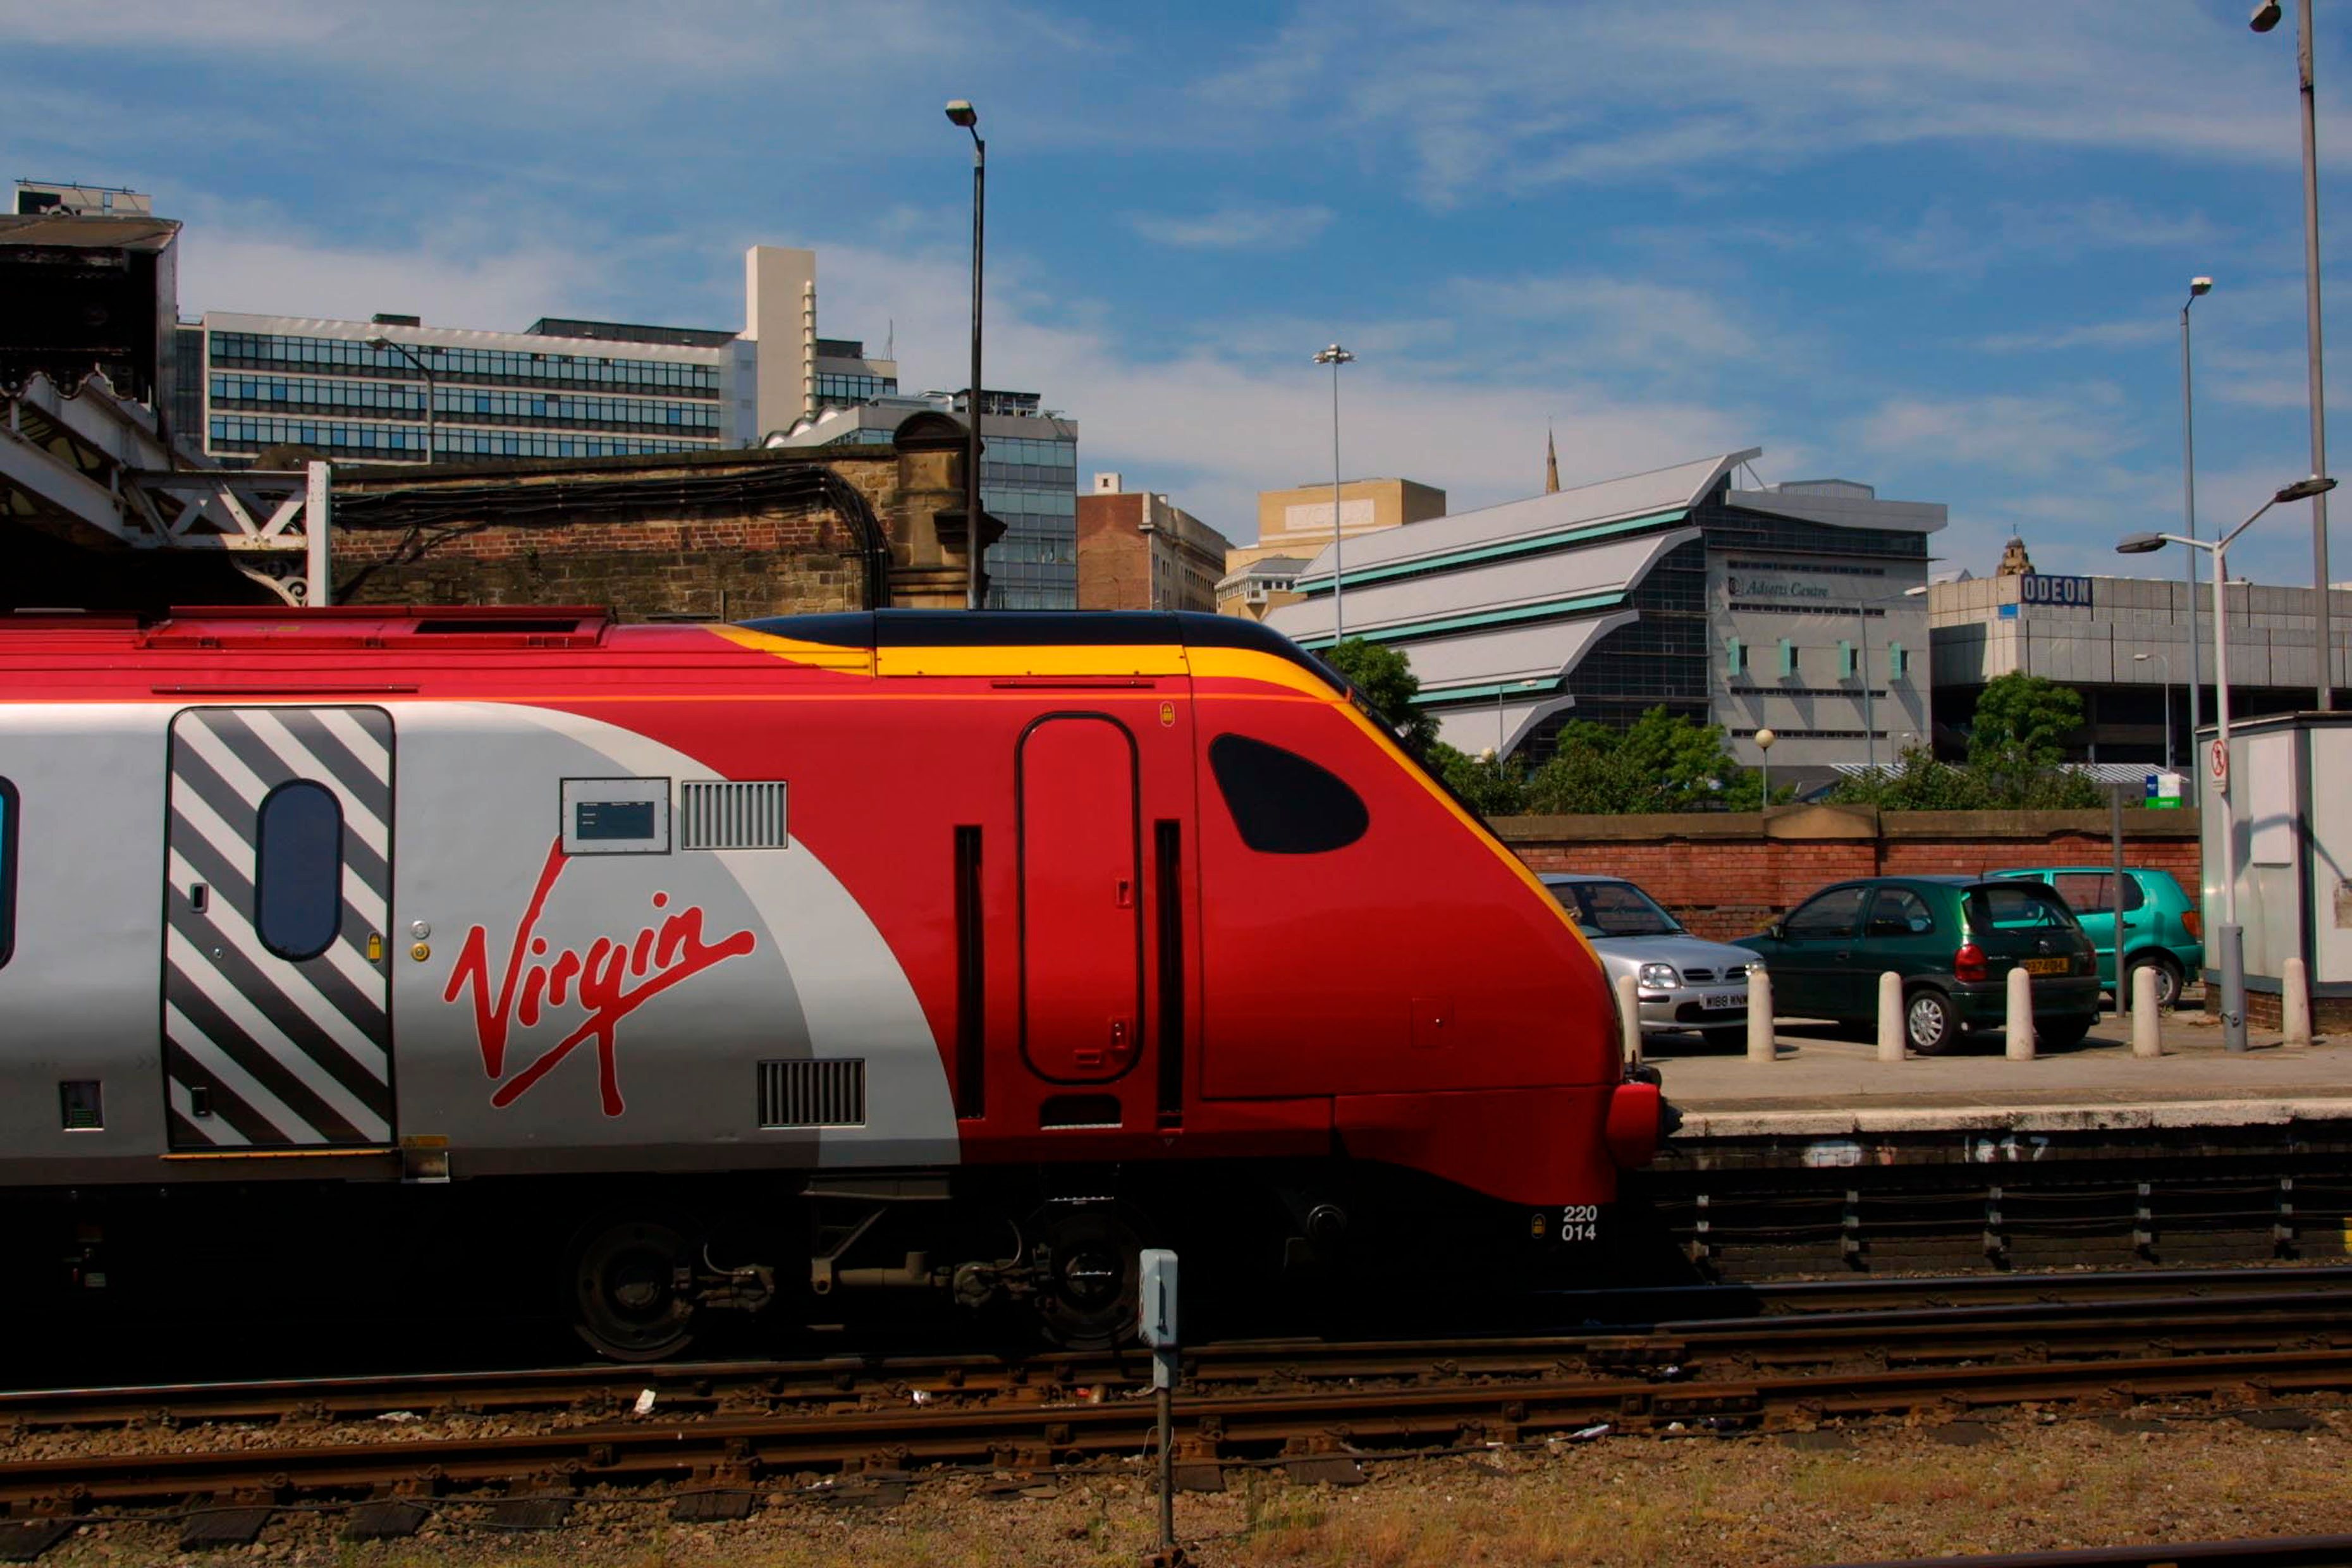 A Virgin Voyager stands at Sheffield station